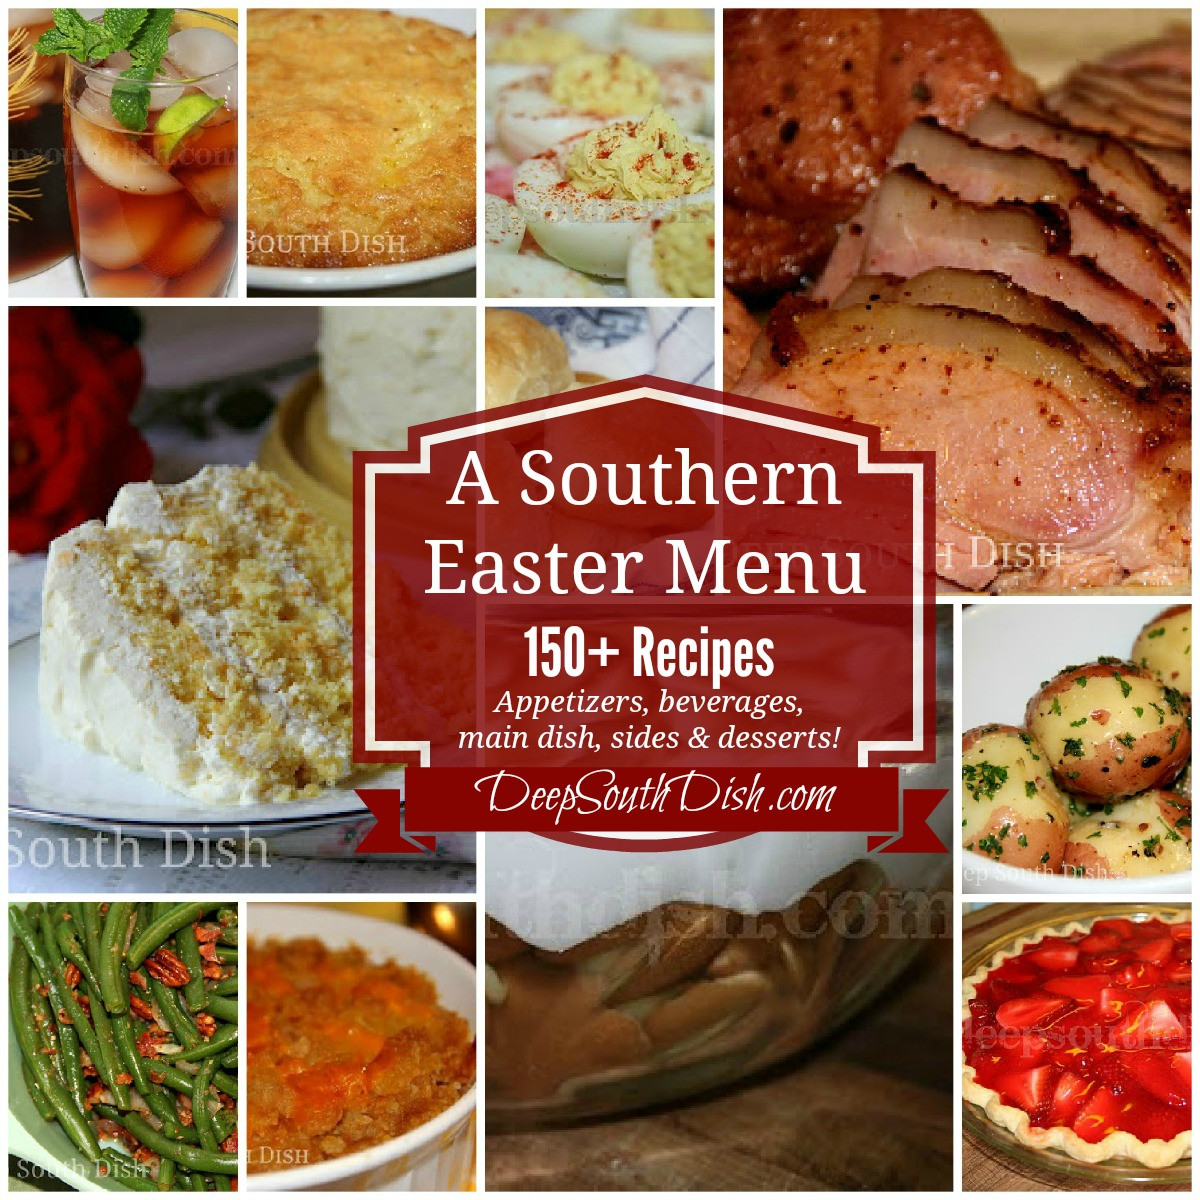 Easter Dinner Menus Ideas
 Deep South Dish Southern Easter Menu Ideas and Recipes